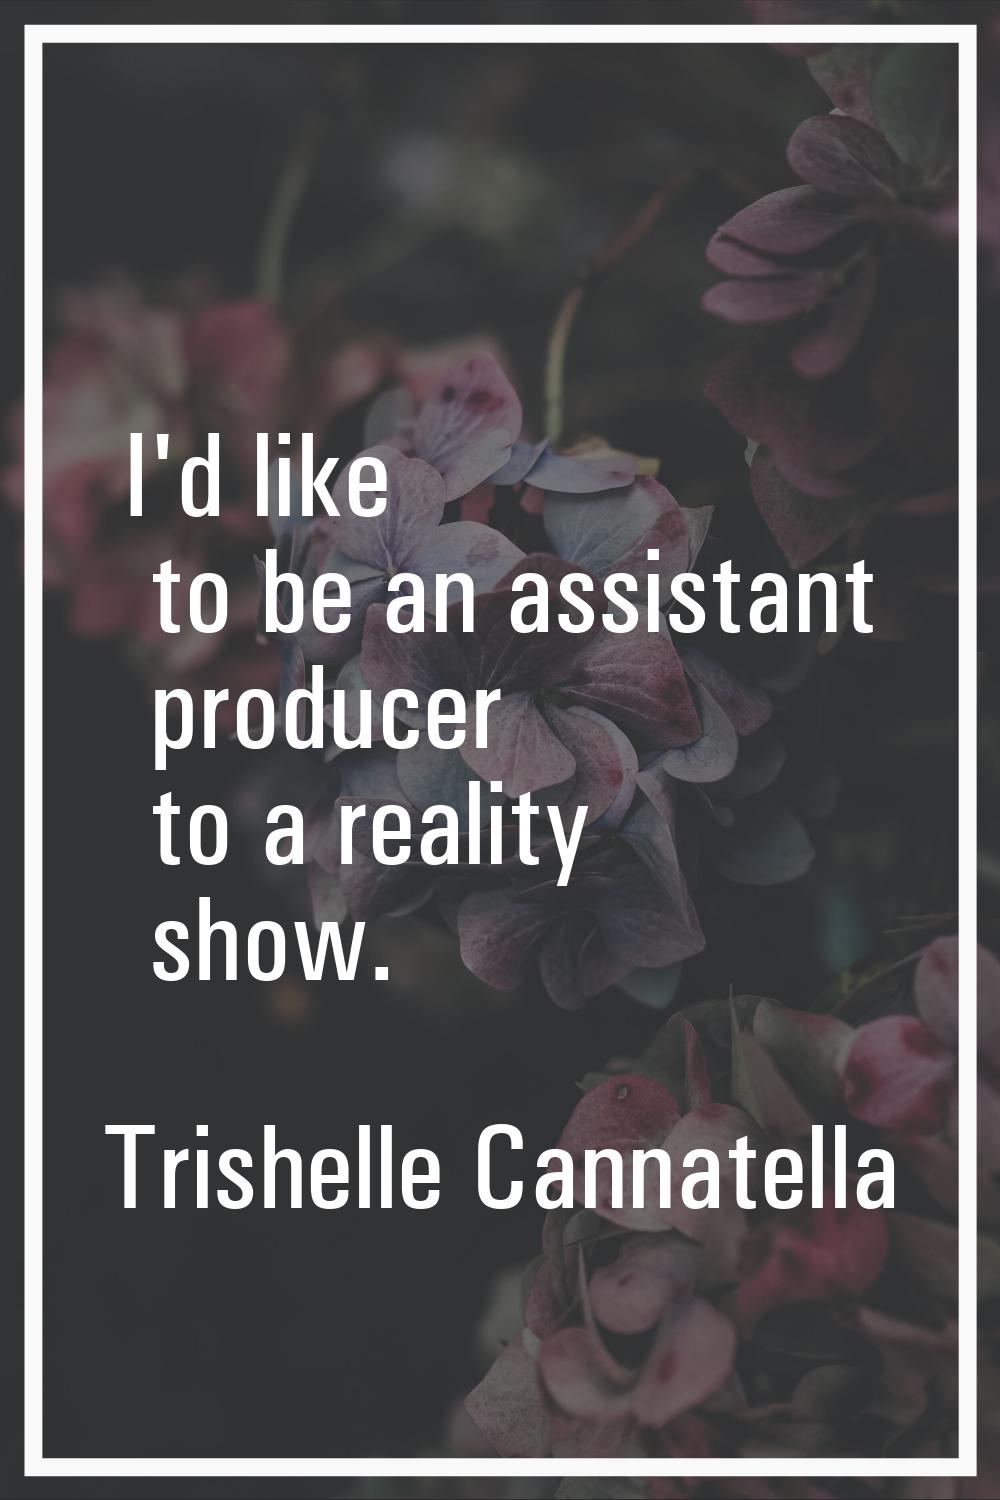 I'd like to be an assistant producer to a reality show.